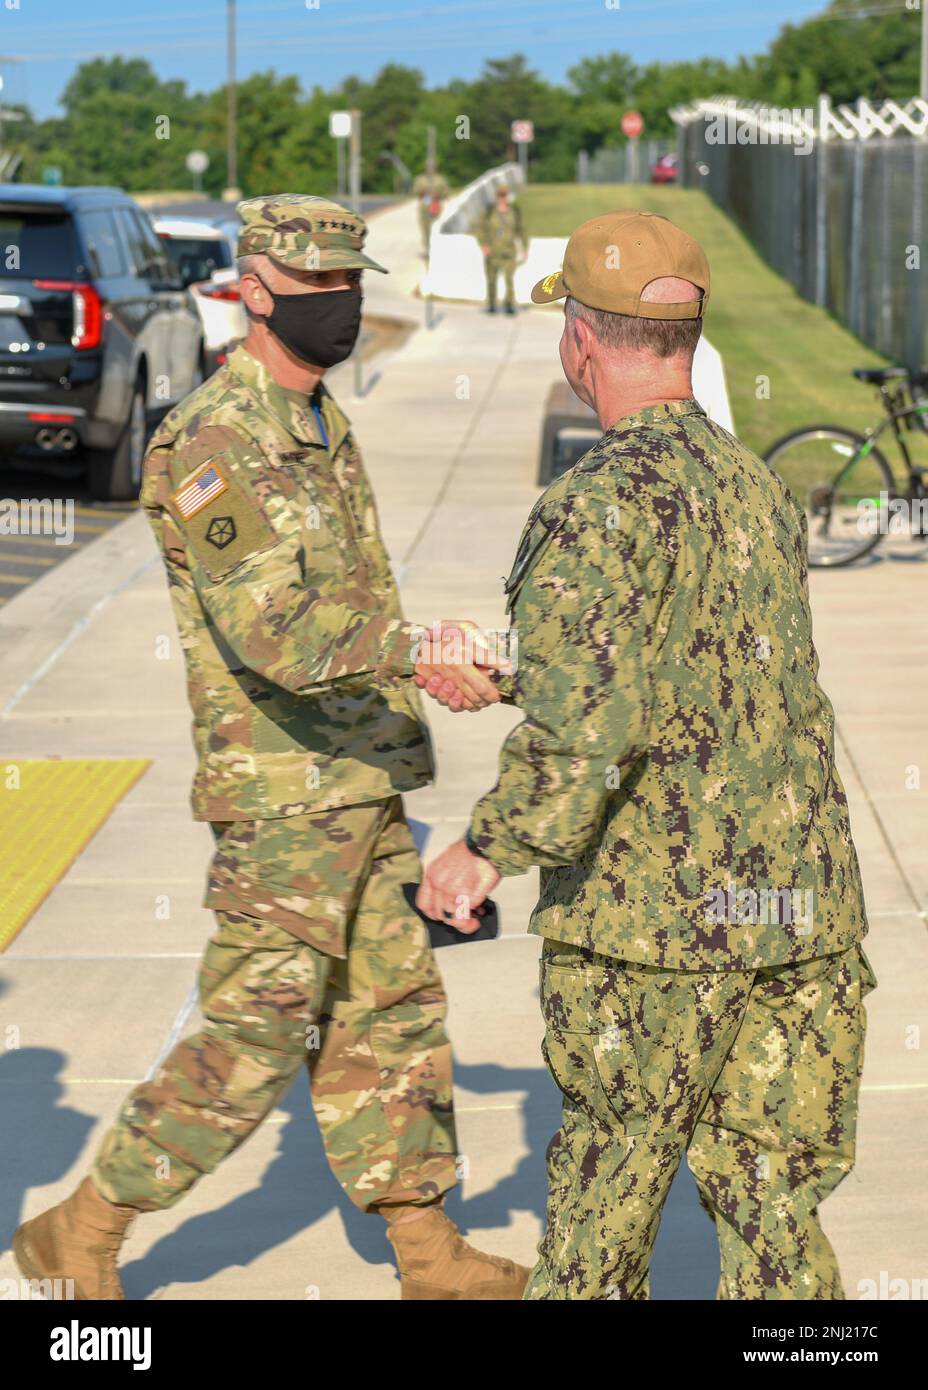 220804-N-XK809-1019 FORT GEORGE G. MEADE, Md. (Aug. 4, 2022) General Paul M. Nakasone, Commander, left, U.S. Cyber Command, Director, National Security Agency and Chief, Central Security Service, is greeted by Vice Adm. Ross Myers, Commander, U.S. Fleet Cyber Command/U.S. 10th Fleet, prior to a change of command ceremony at the U.S. Fleet Cyber Command/U.S. 10th Fleet Headquarters. During the ceremony, Vice Adm. Craig Clapperton relieved Vice Adm. Ross Myers as commander of U.S. Fleet Cyber Command/U.S. 10th Fleet. Stock Photo